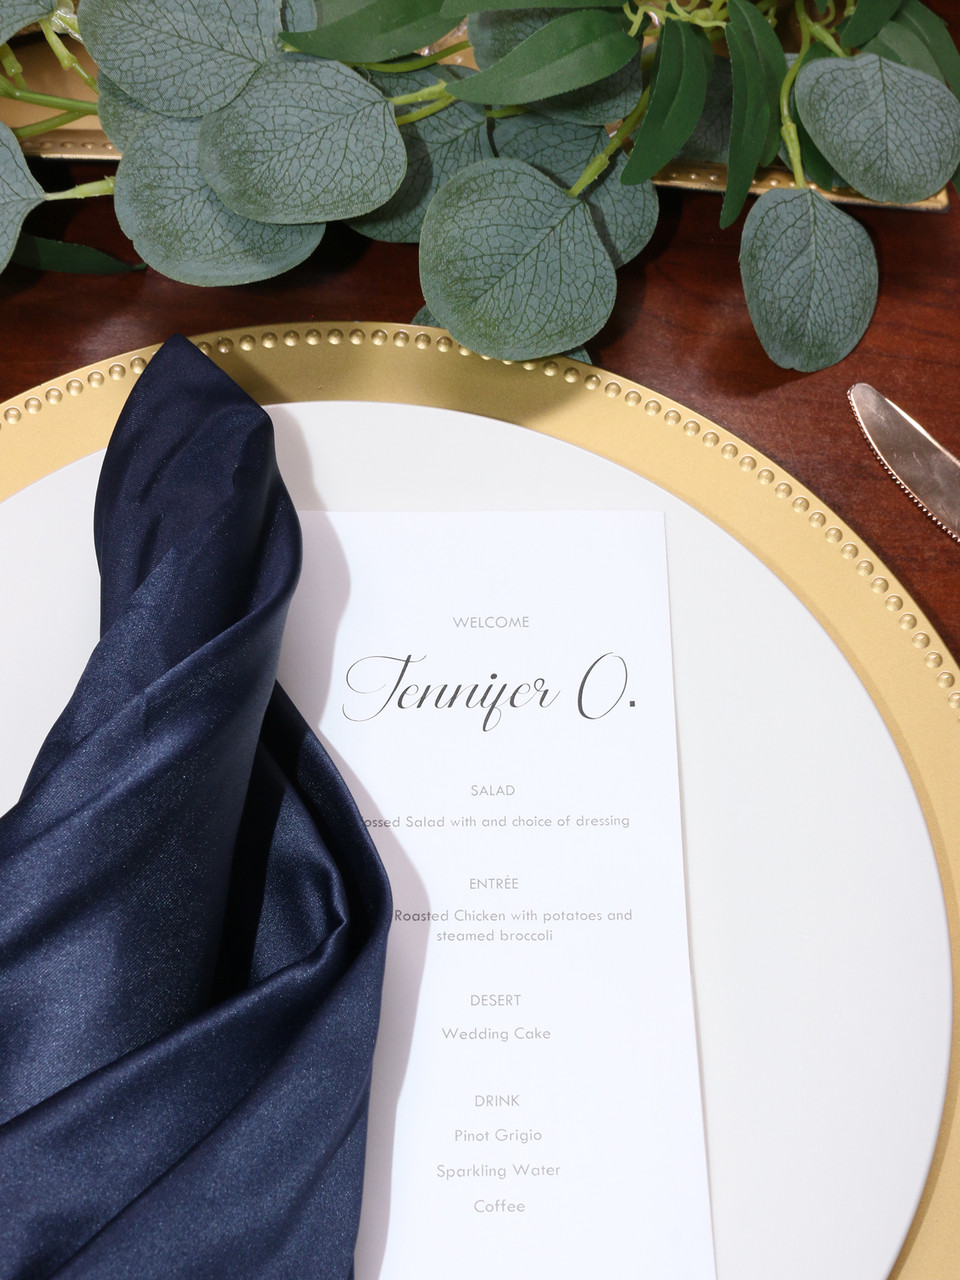 https://cdn11.bigcommerce.com/s-bch7e9/images/stencil/1280x1280/products/590/10854/20-inch-navy-blue-lamour-satin-napkins-for-weddings-2__13175.1692649885.jpg?c=2